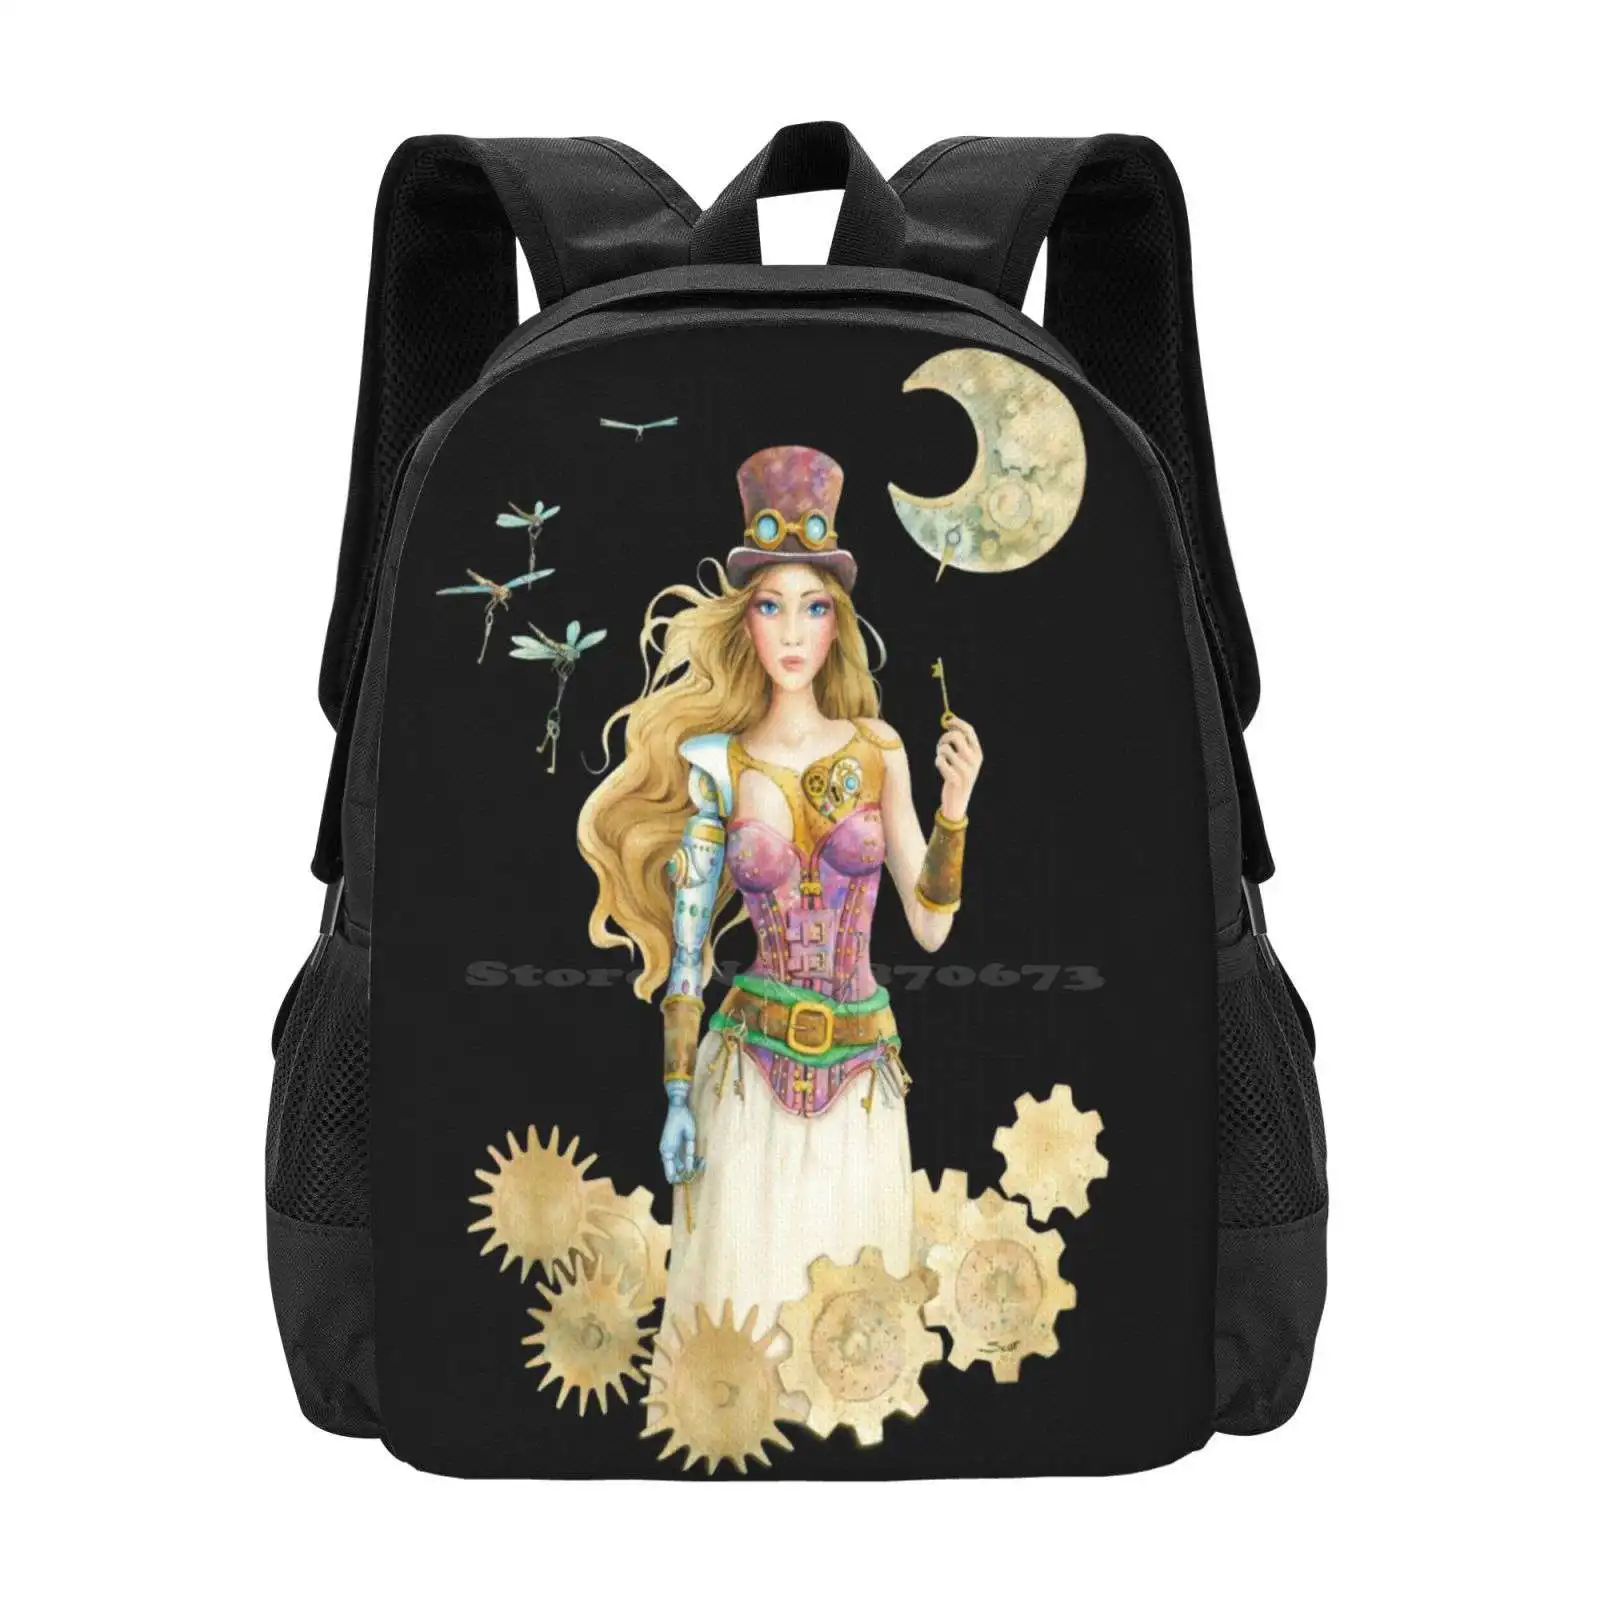 

The Key By Scot Howden Hot Sale Backpack Fashion Bags Steampunk Heart Cyborg Moon Robot Dragonfly Scot Howden Steam Punk